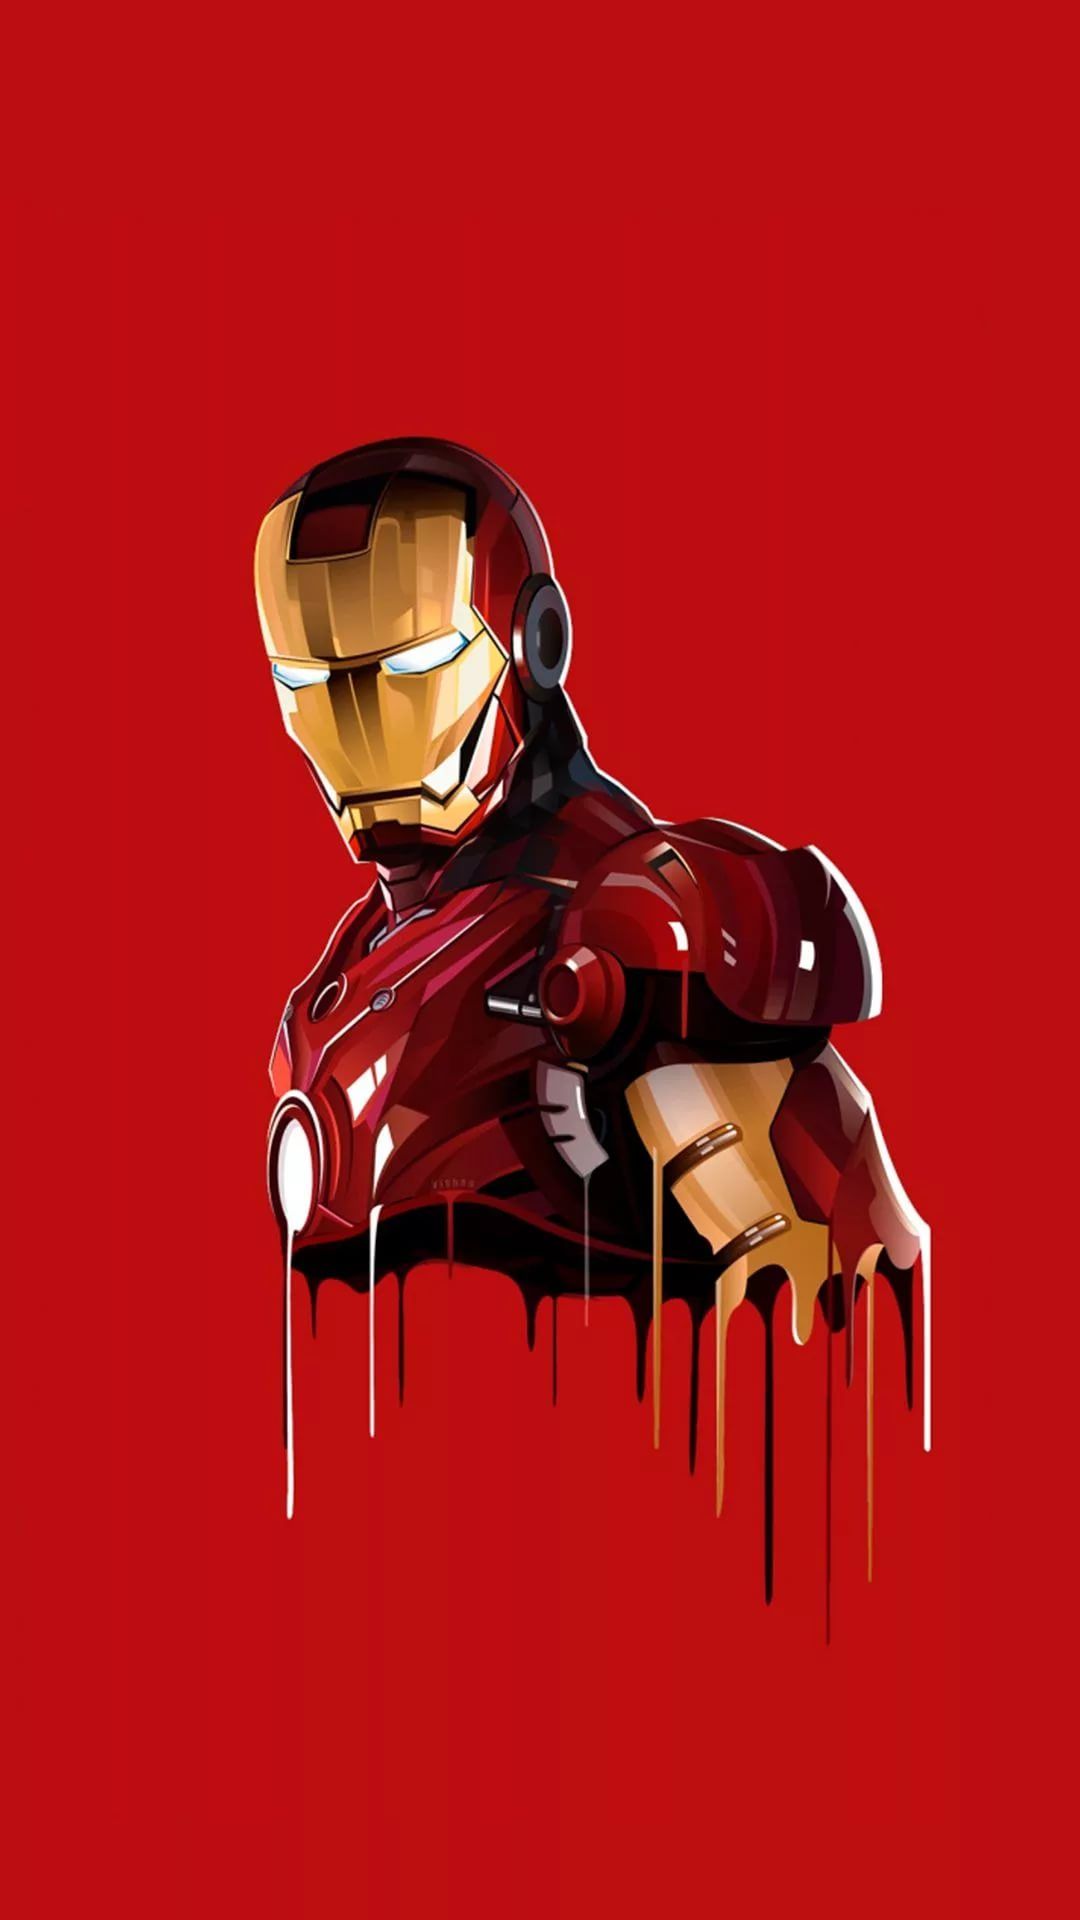 Iron Man D Wallpaper For Android 1080p Iron Man Wallpaper Hd Hd Wallpaper Backgrounds Download